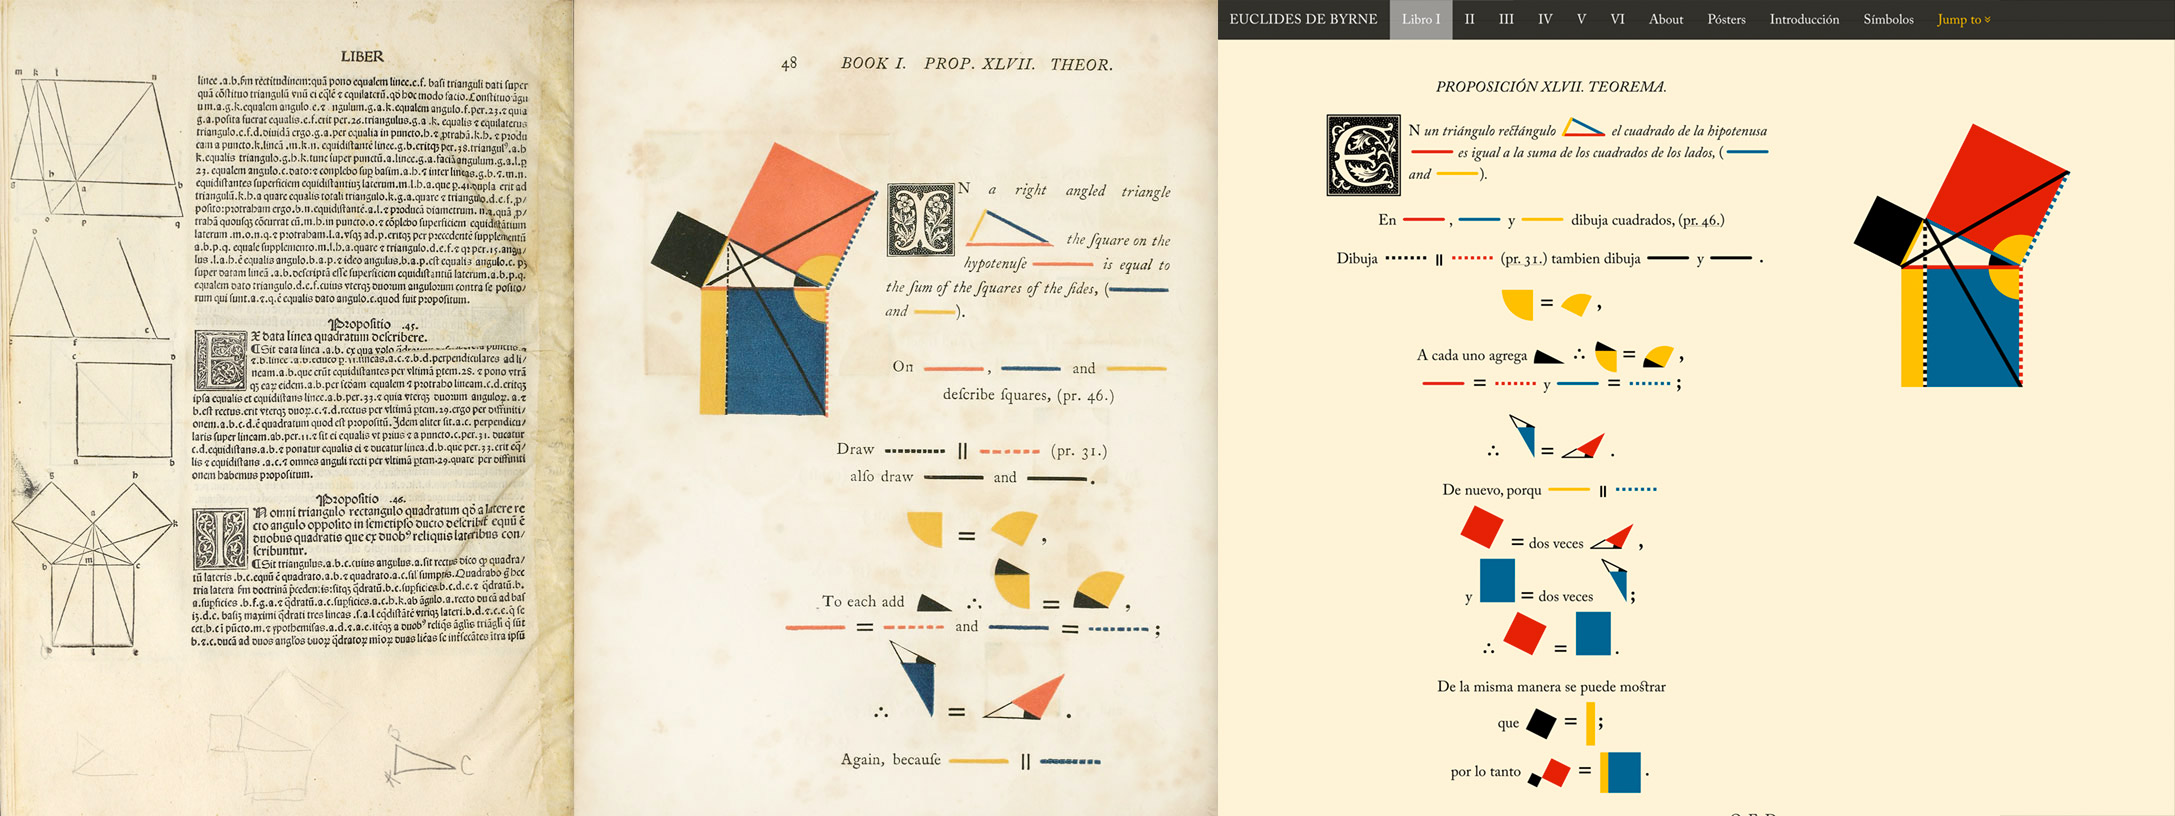 Comparison between first printed edition, Byrne’s version, and the new web version